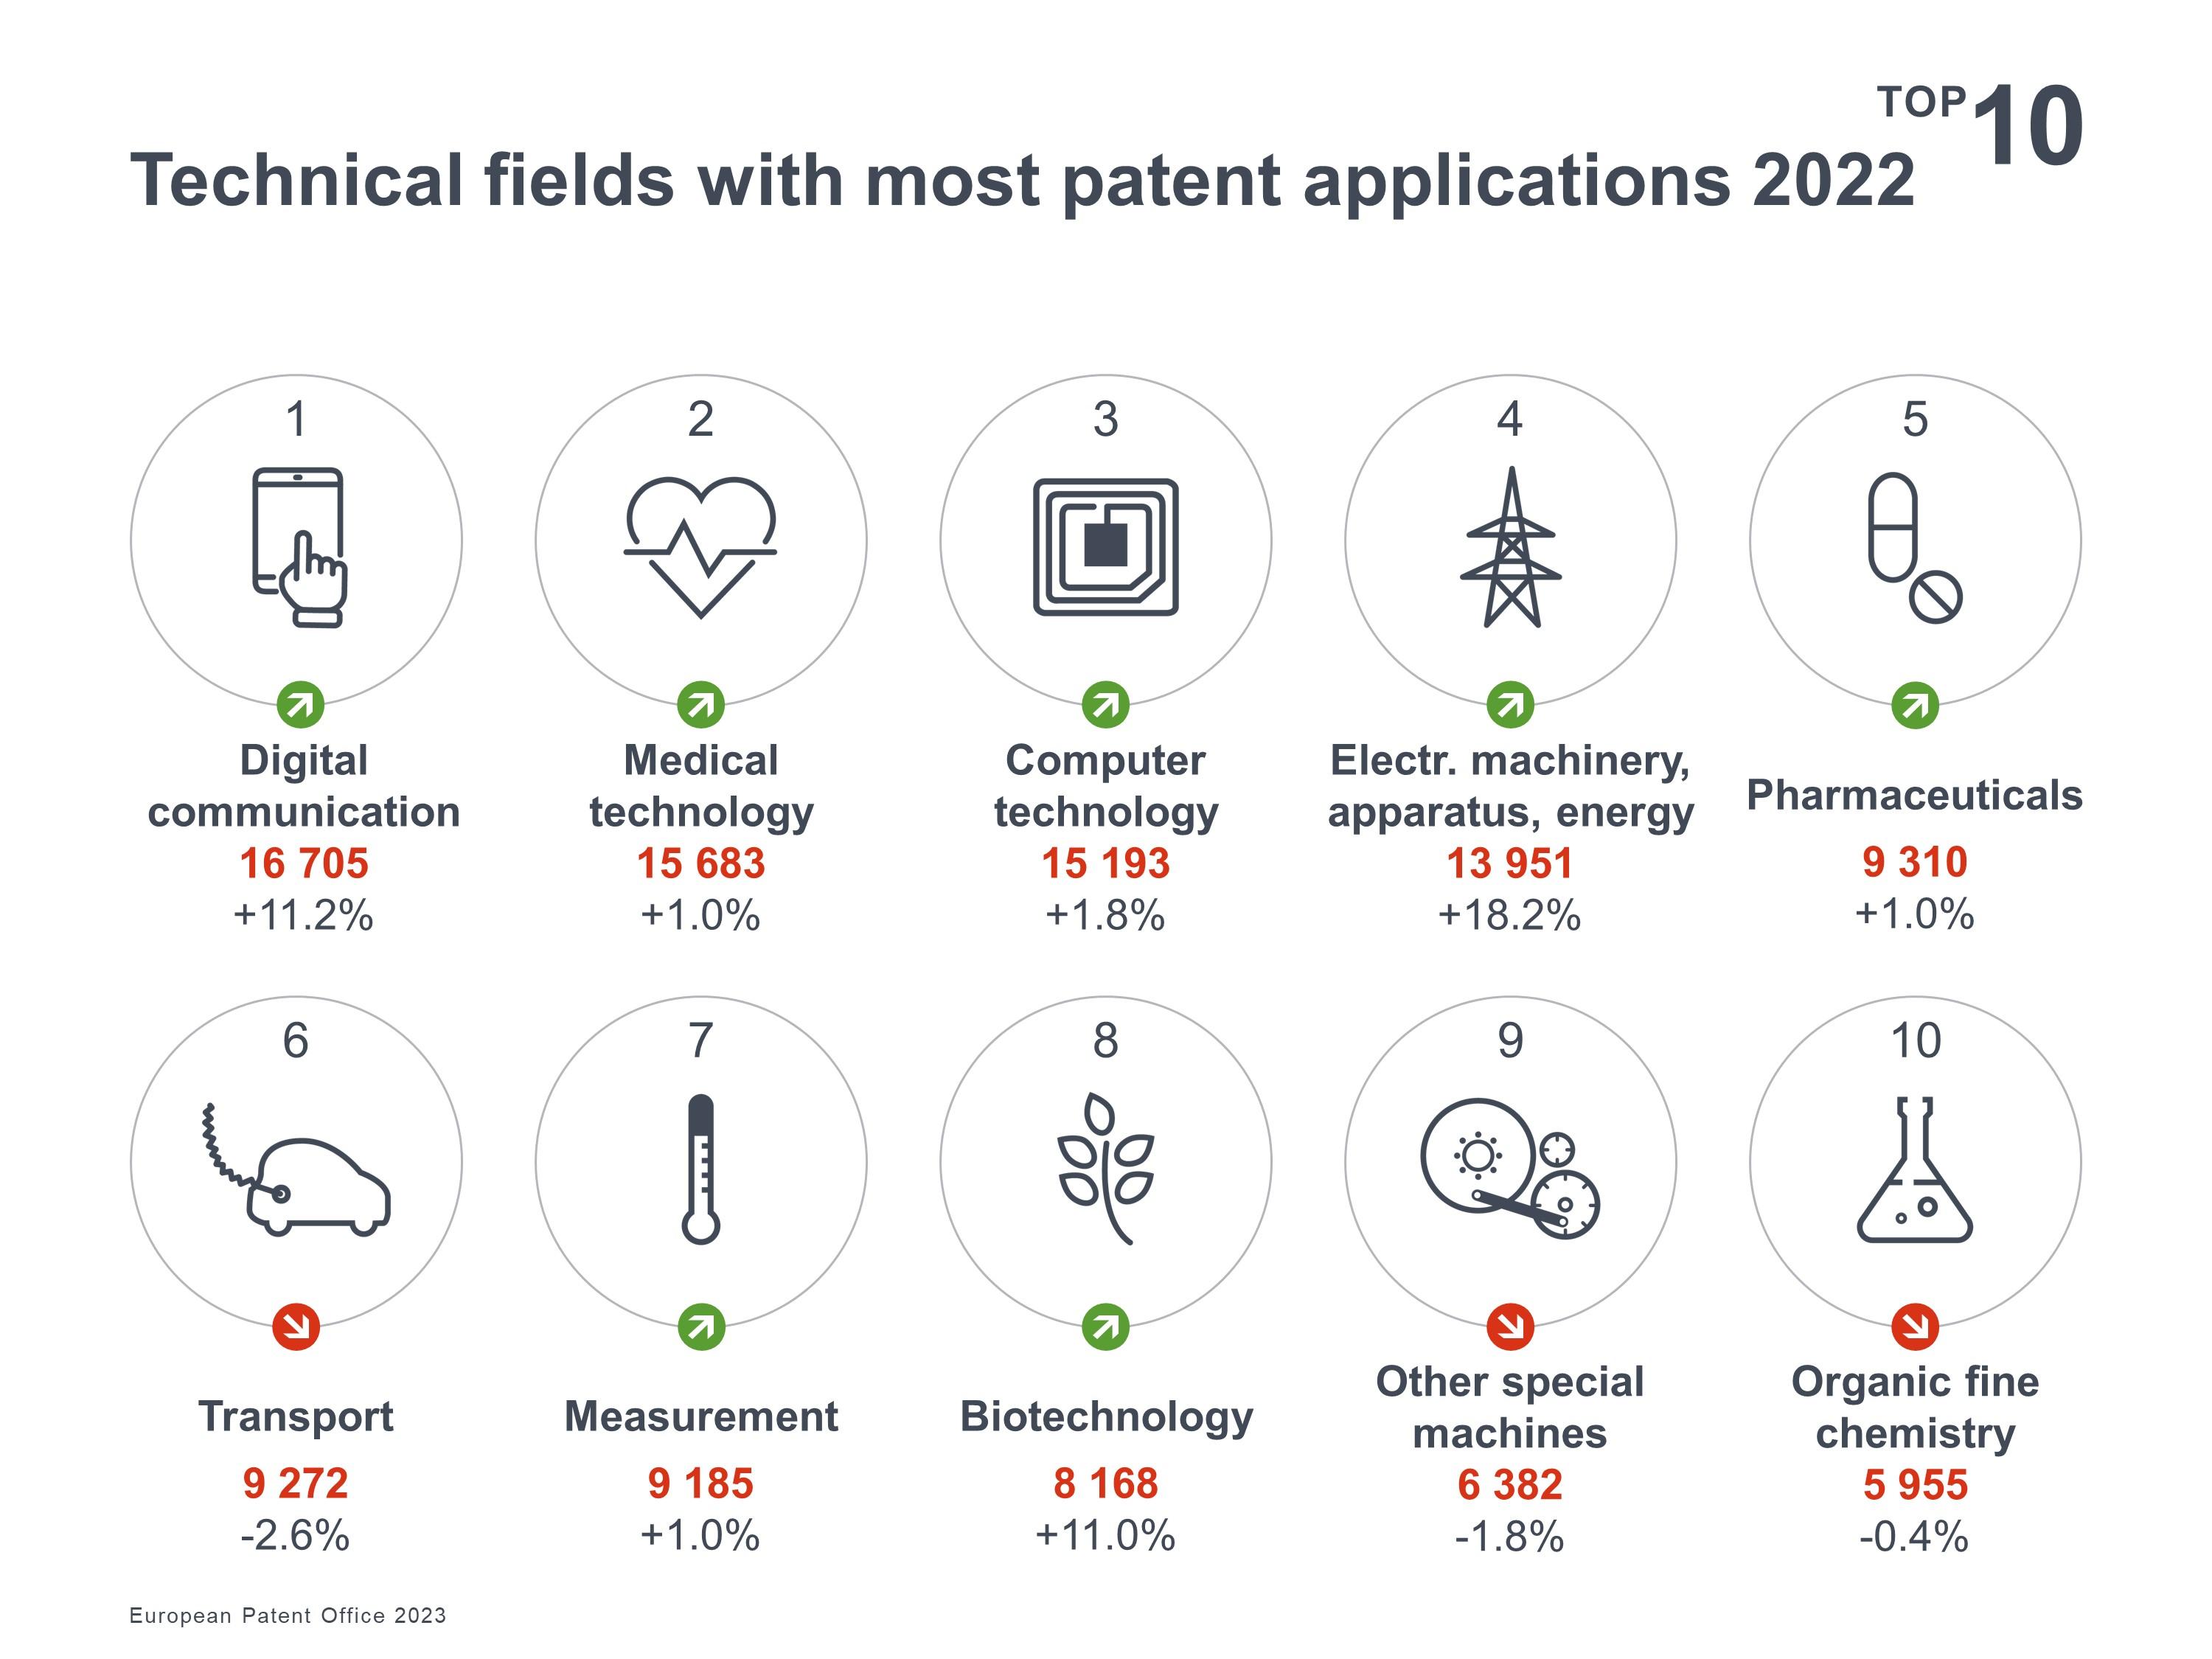 Technical fields with most patent applications 2022. First place digital communication with 16705 applications in 2022.